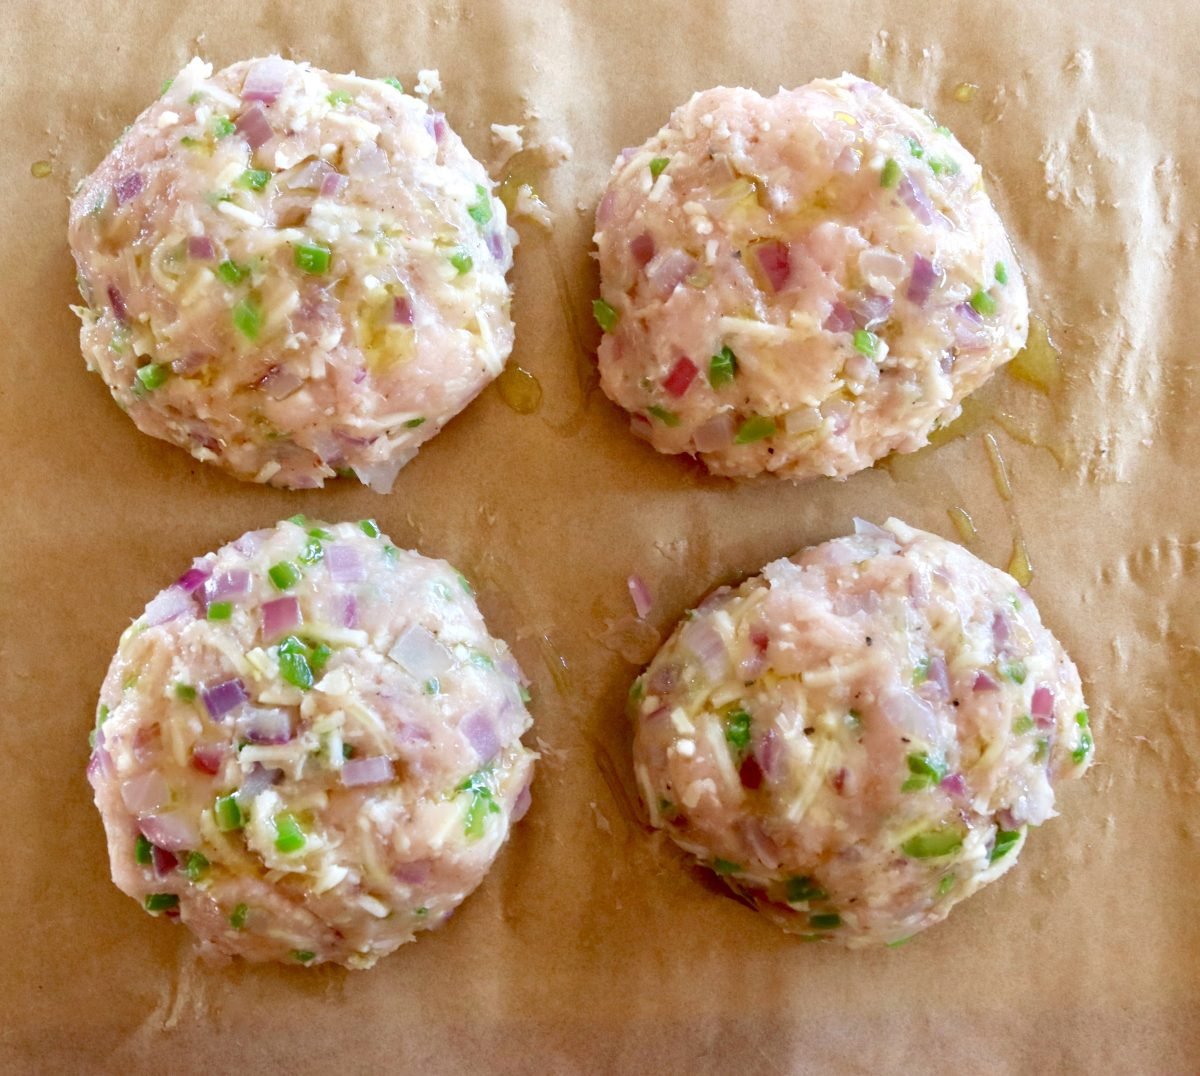 Four raw, shaped Turkey Burgers on parchment paper.